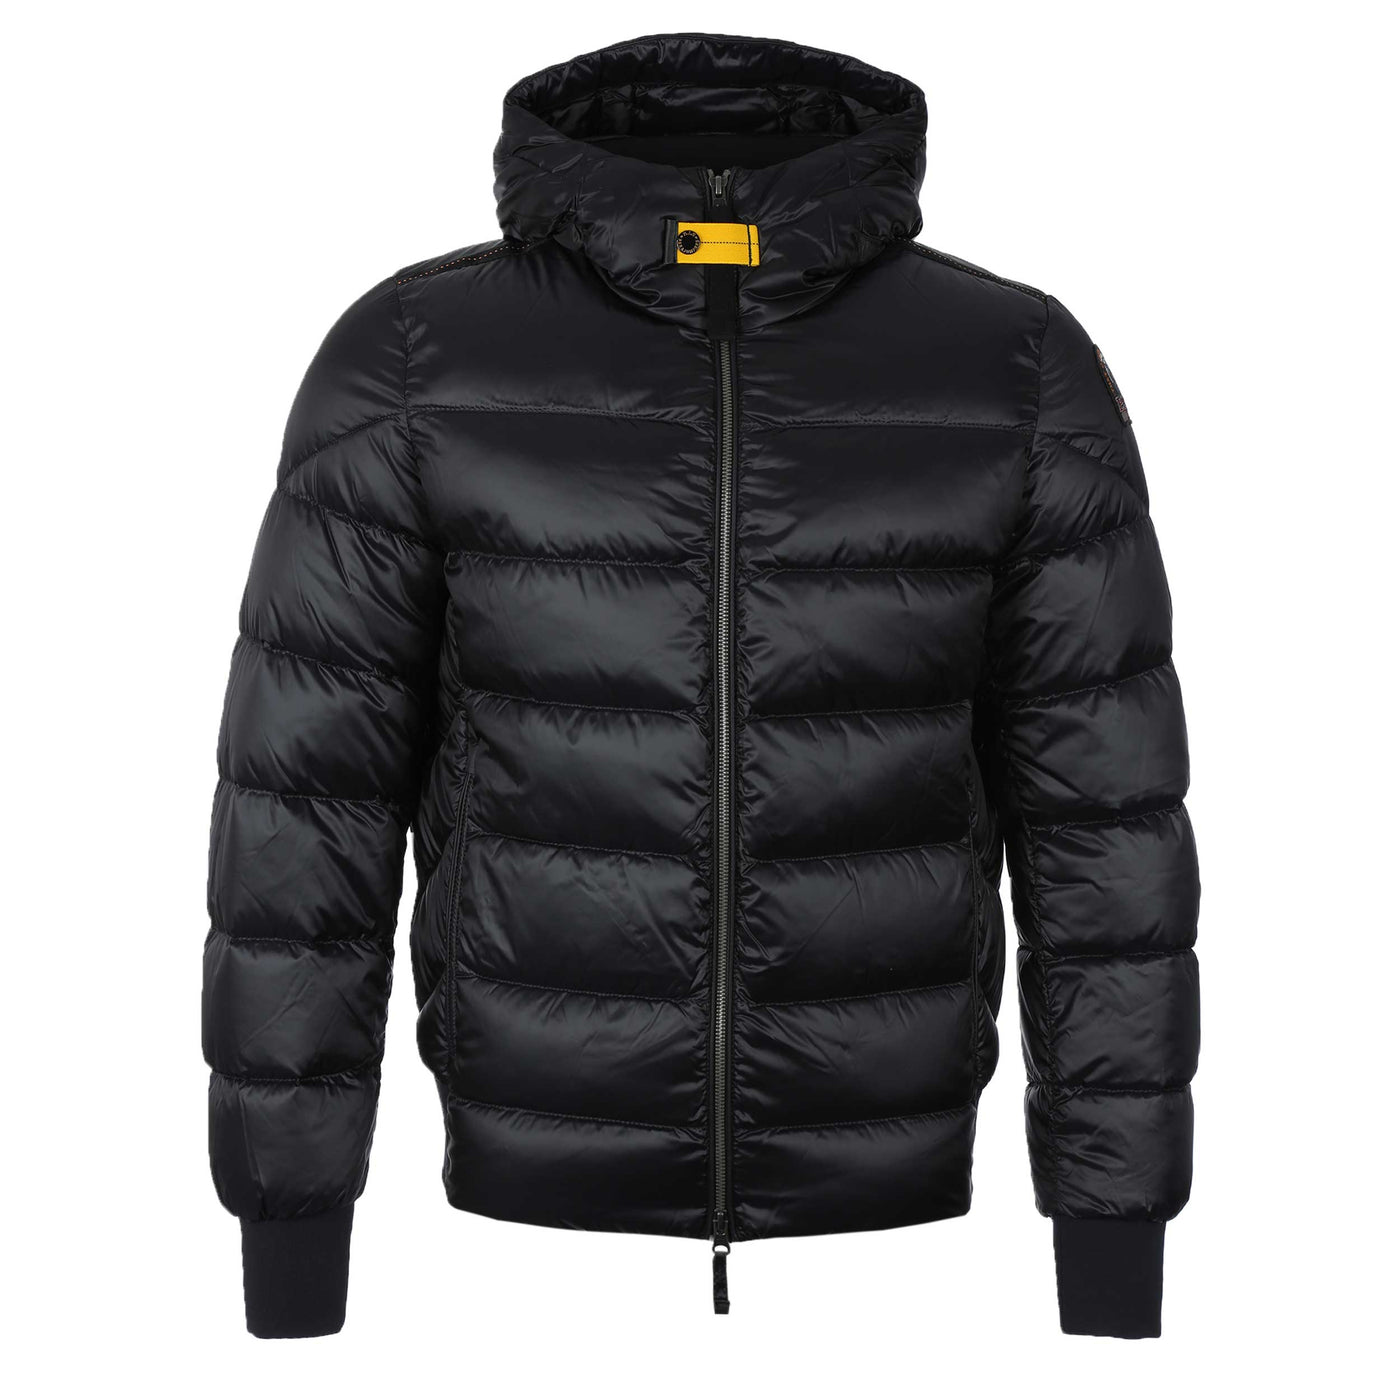 Parajumpers Pharrell Jacket in Pencil